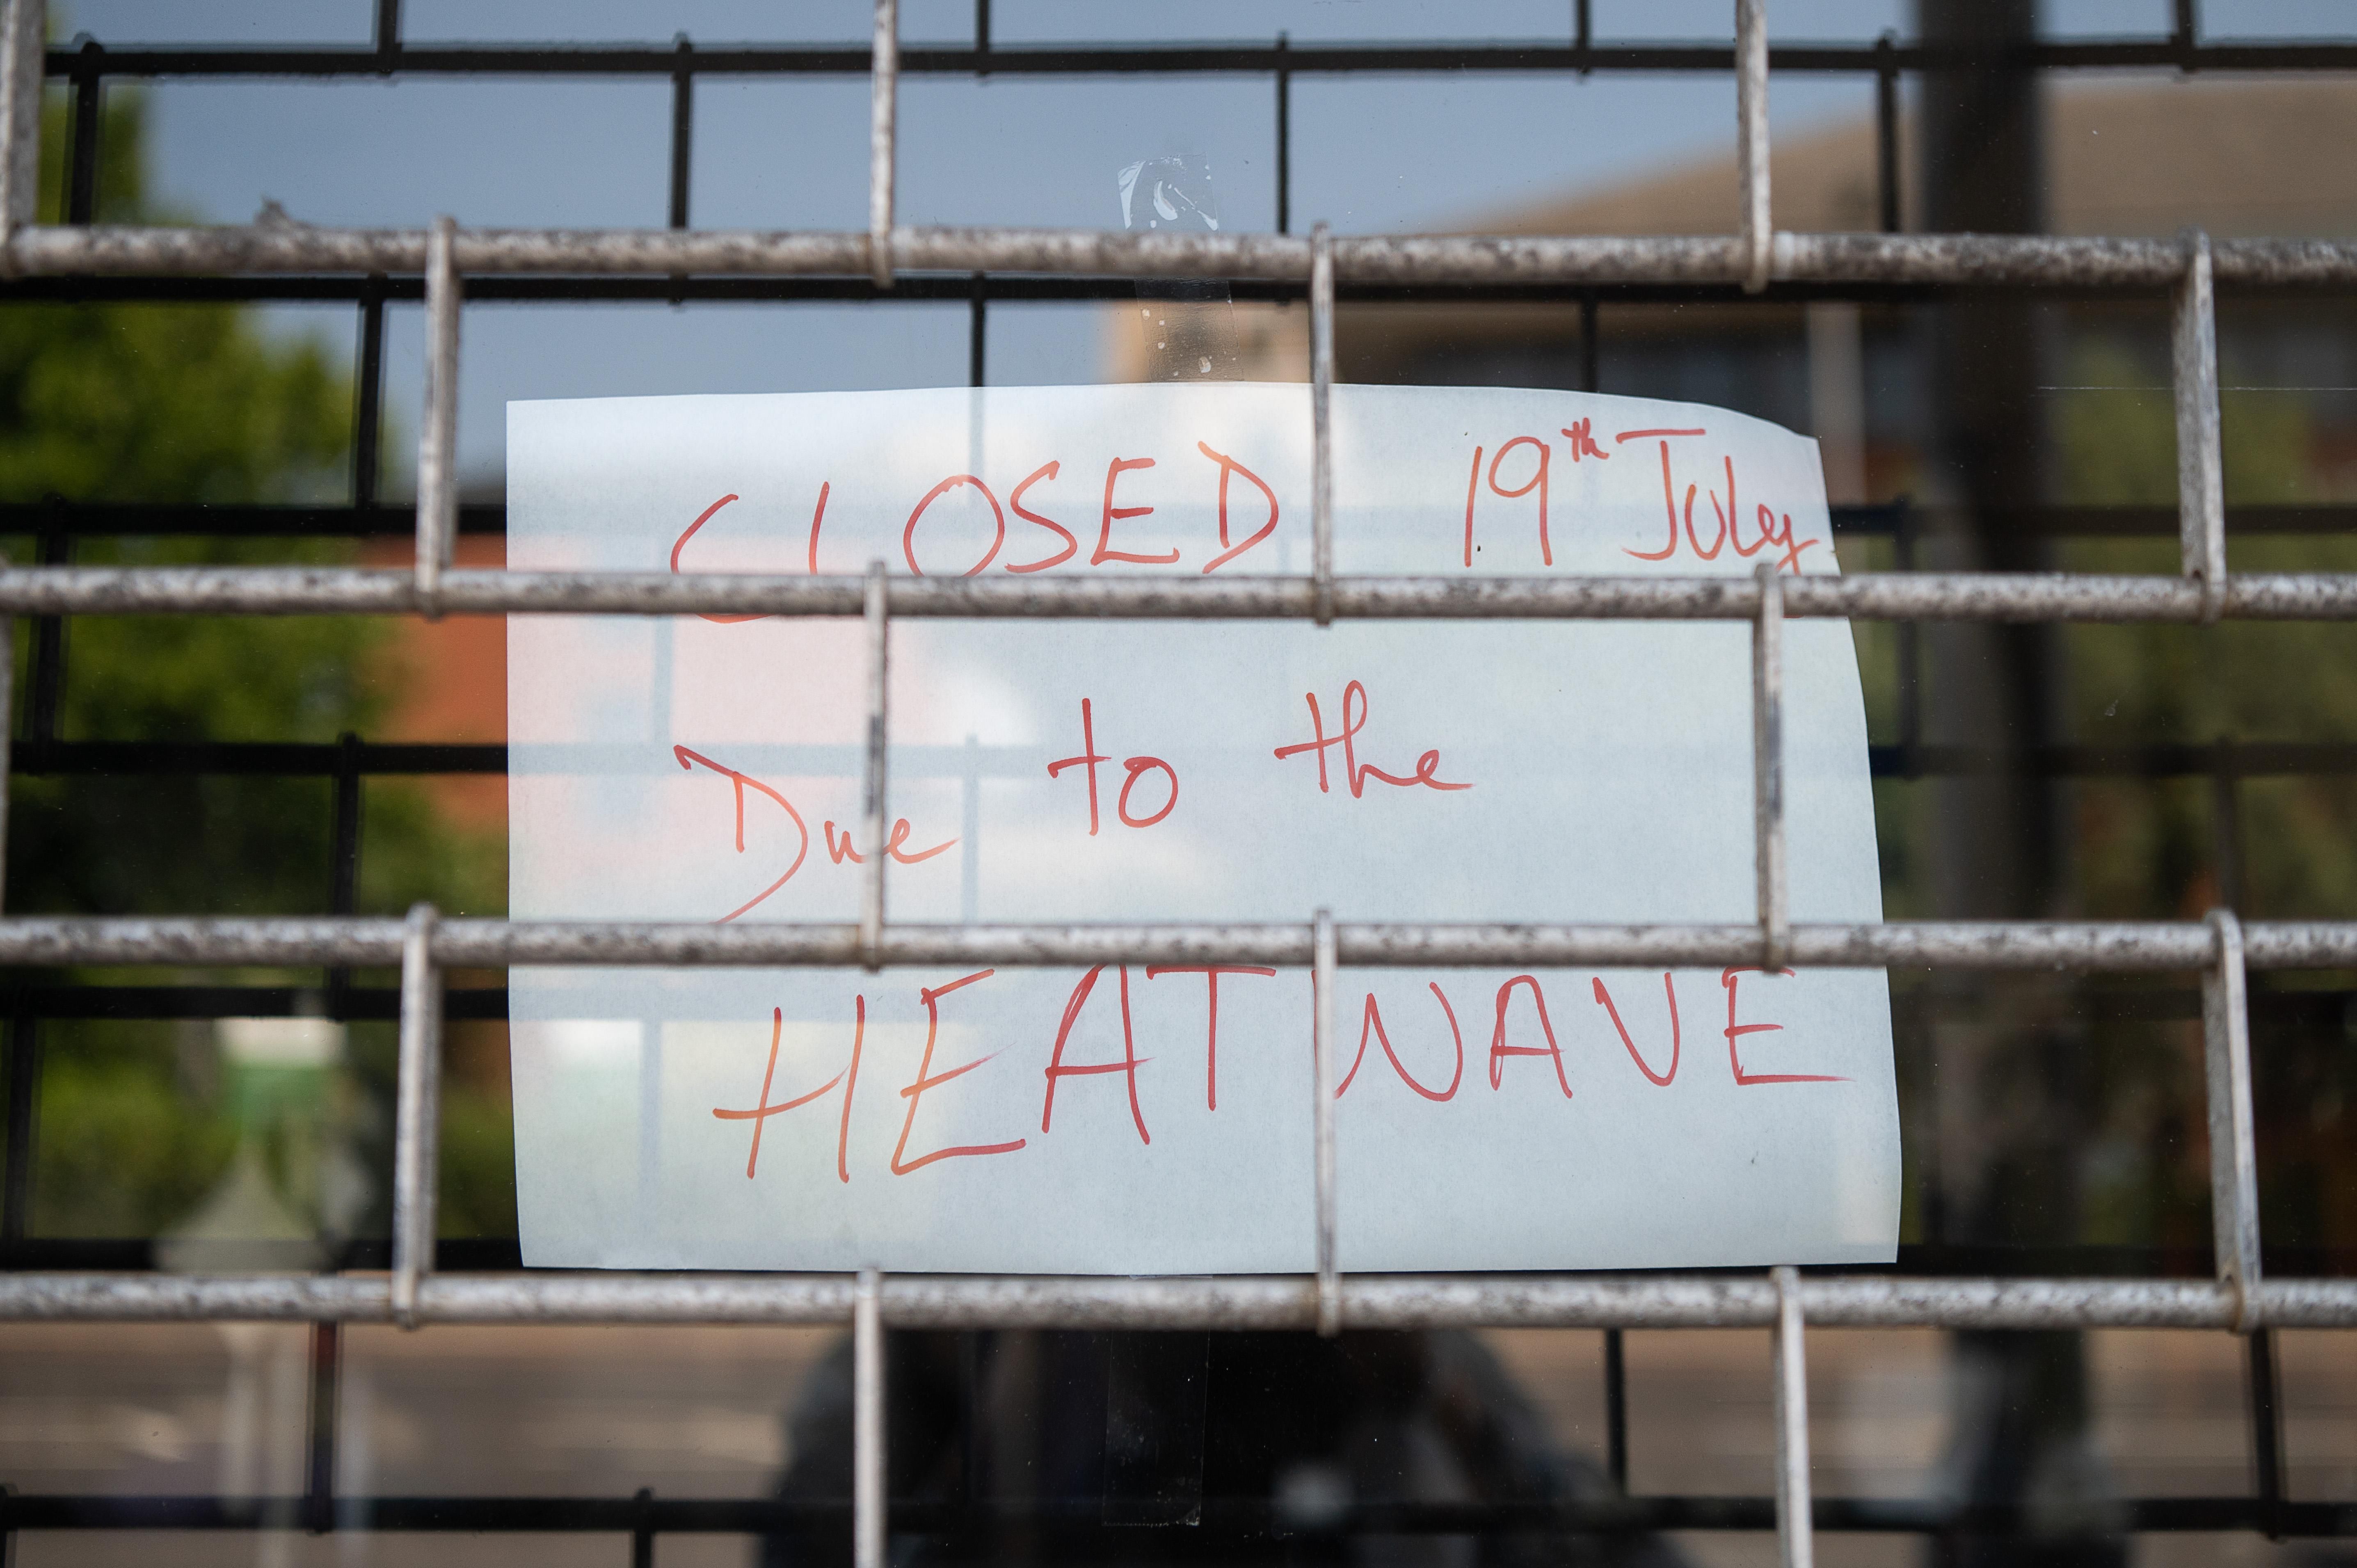 A sign indicating that a store is closed due to an ongoing heatwave is seen in London on July 19, 2022.